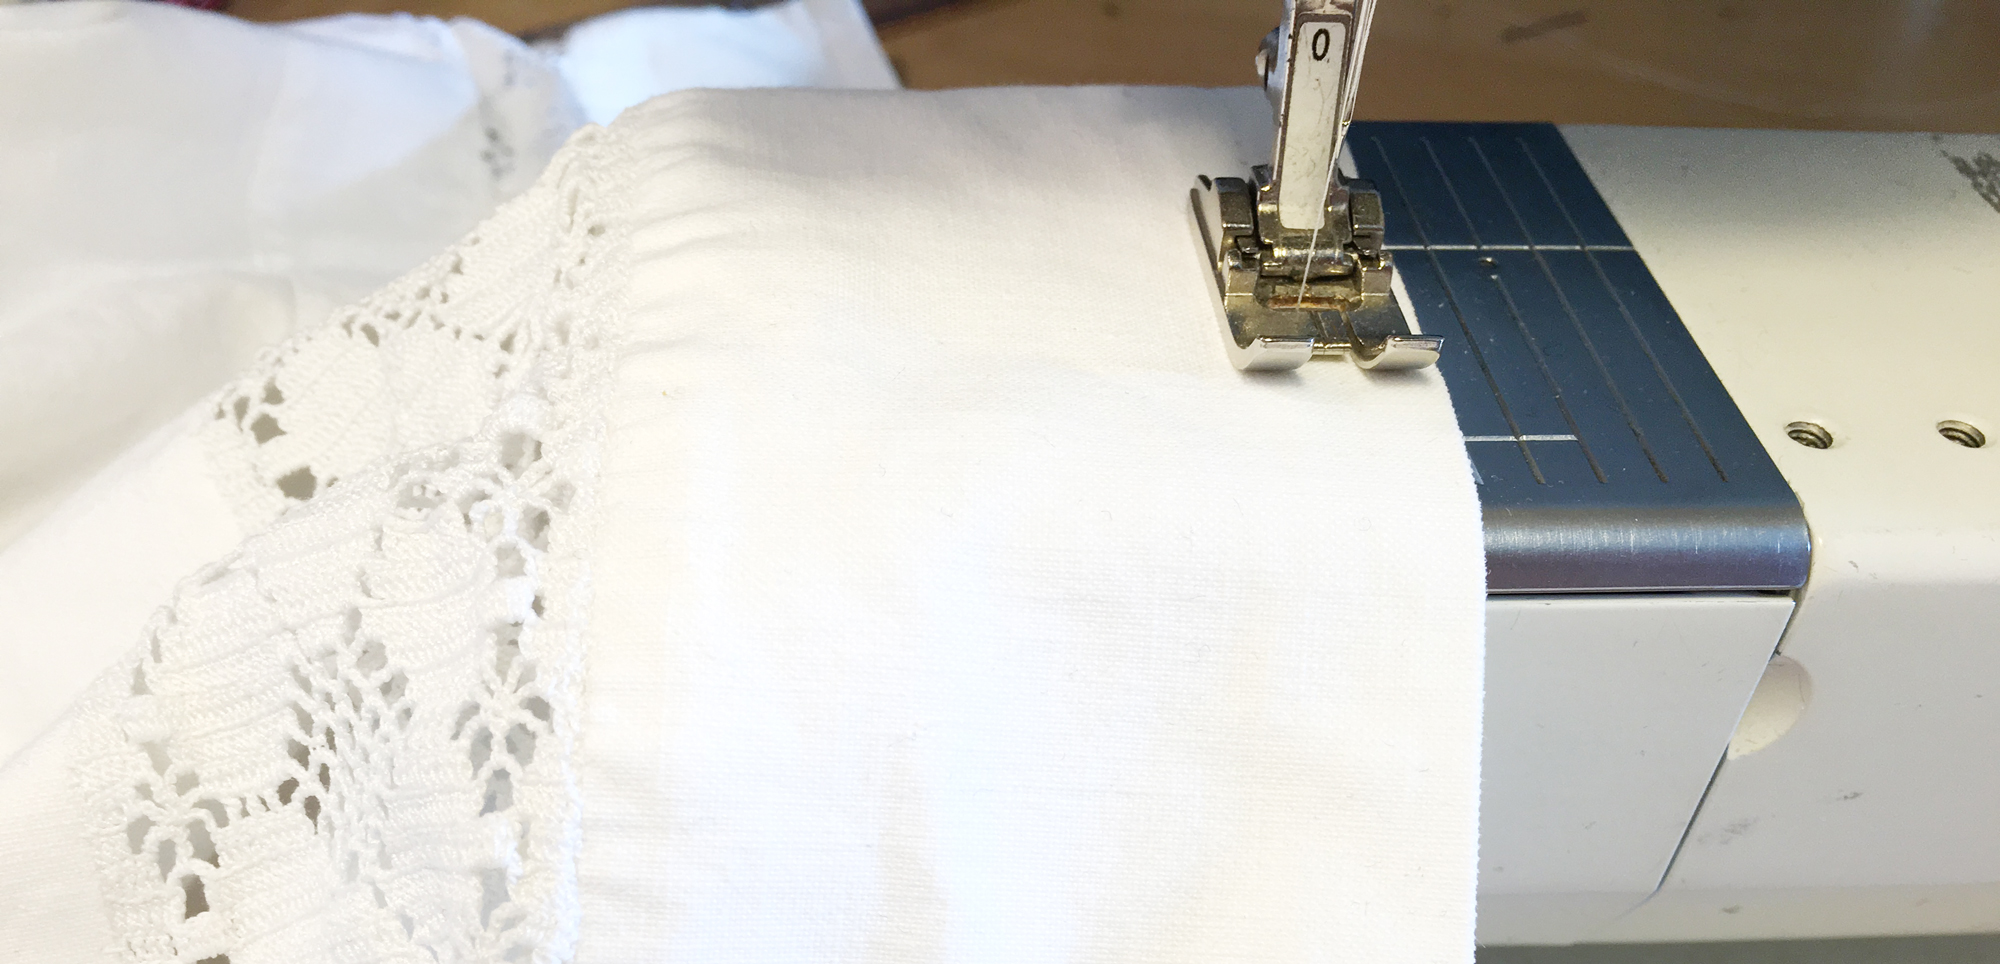 Making your own duvet covers – a tutorial